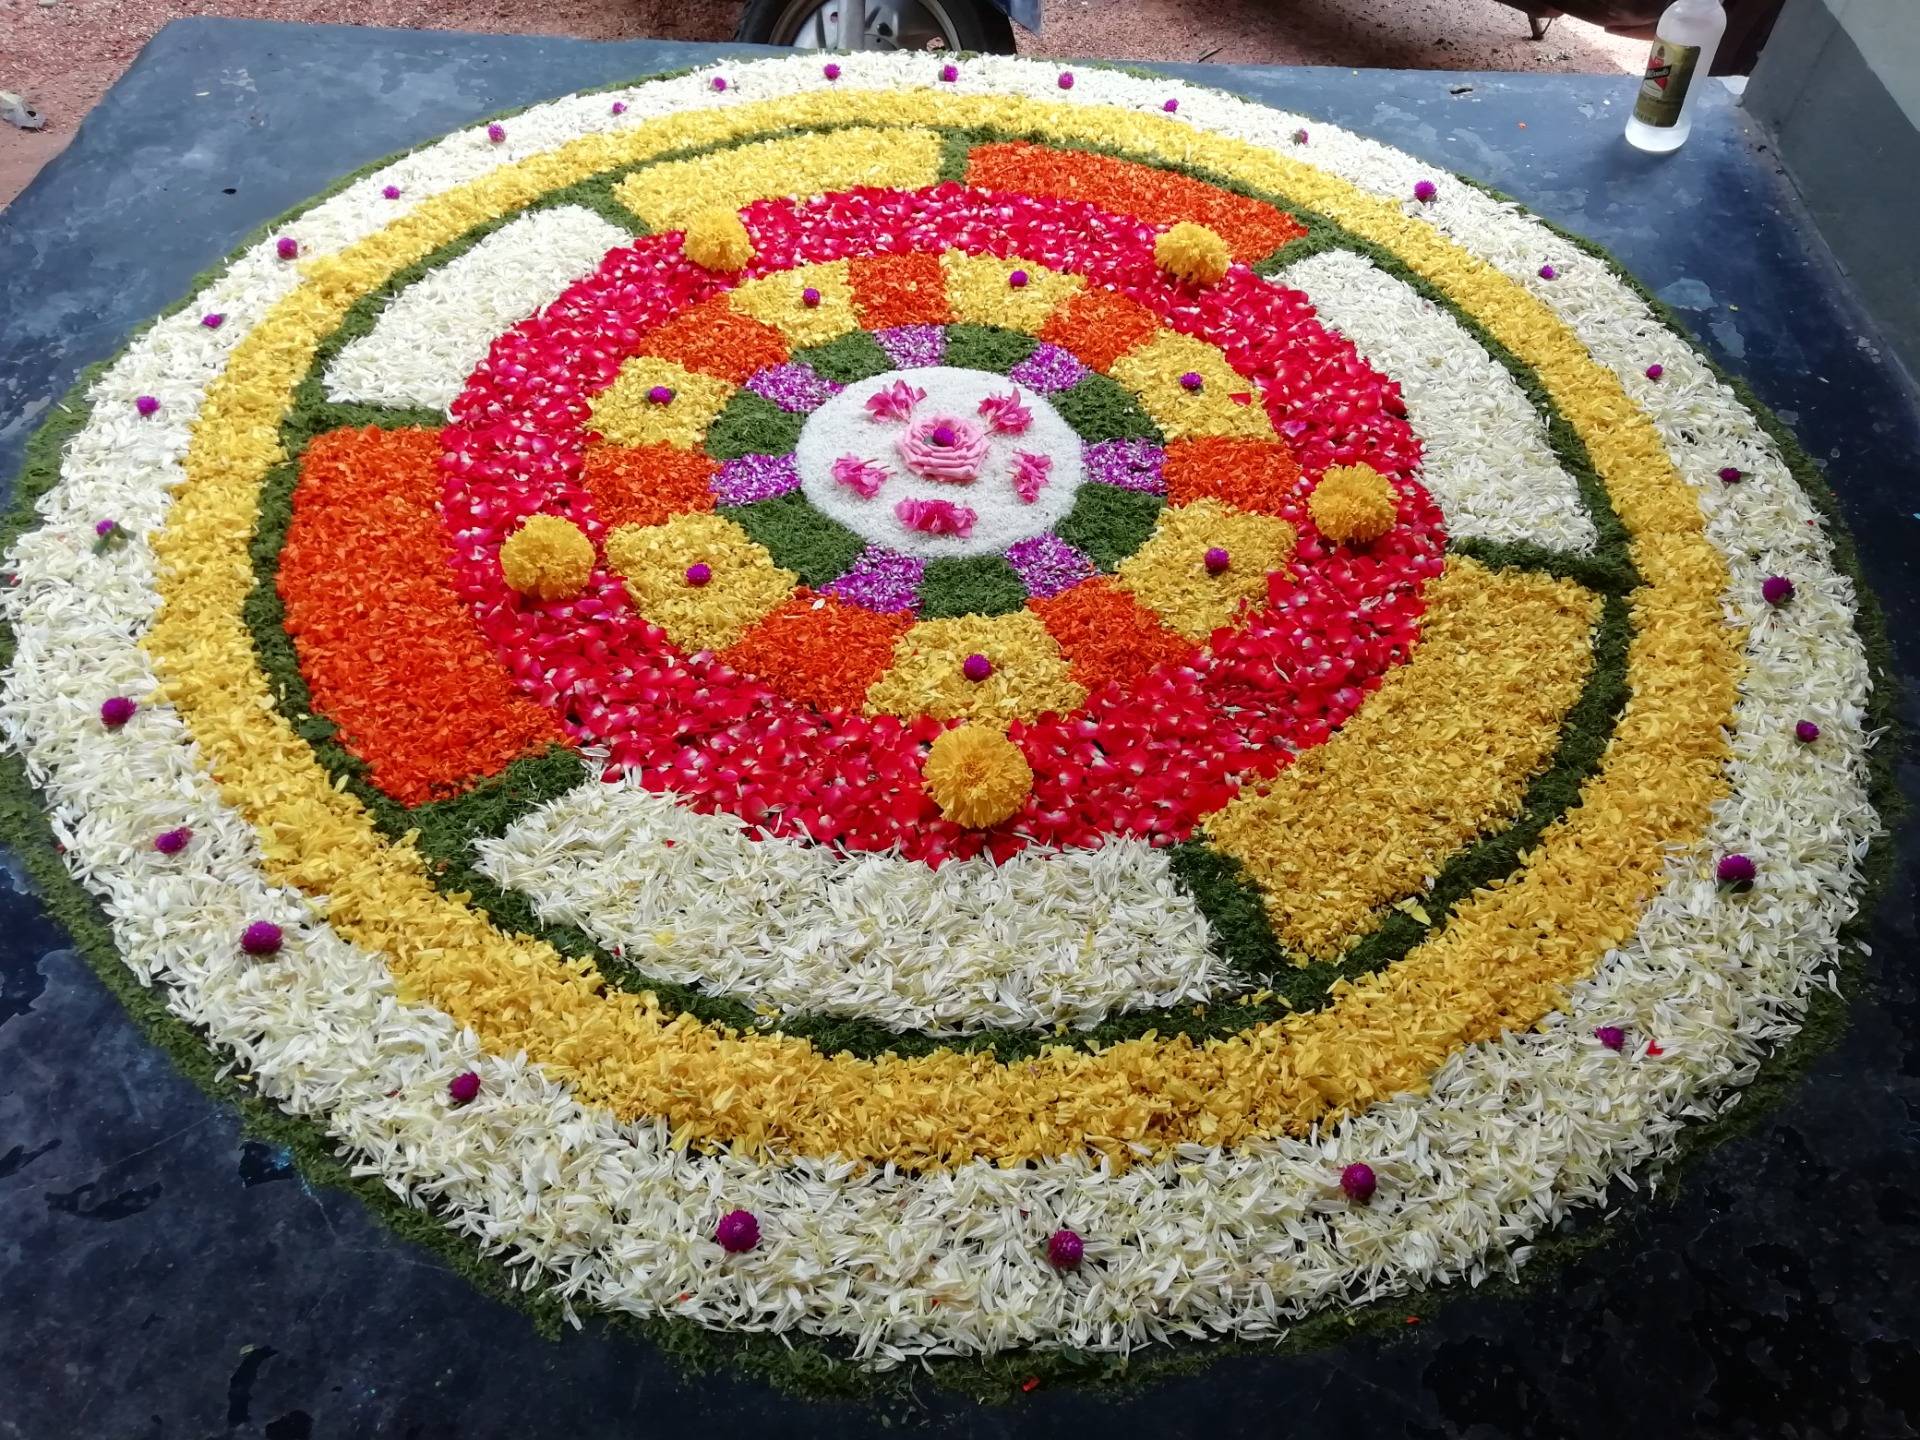 The floral patterns made in houses during Onam